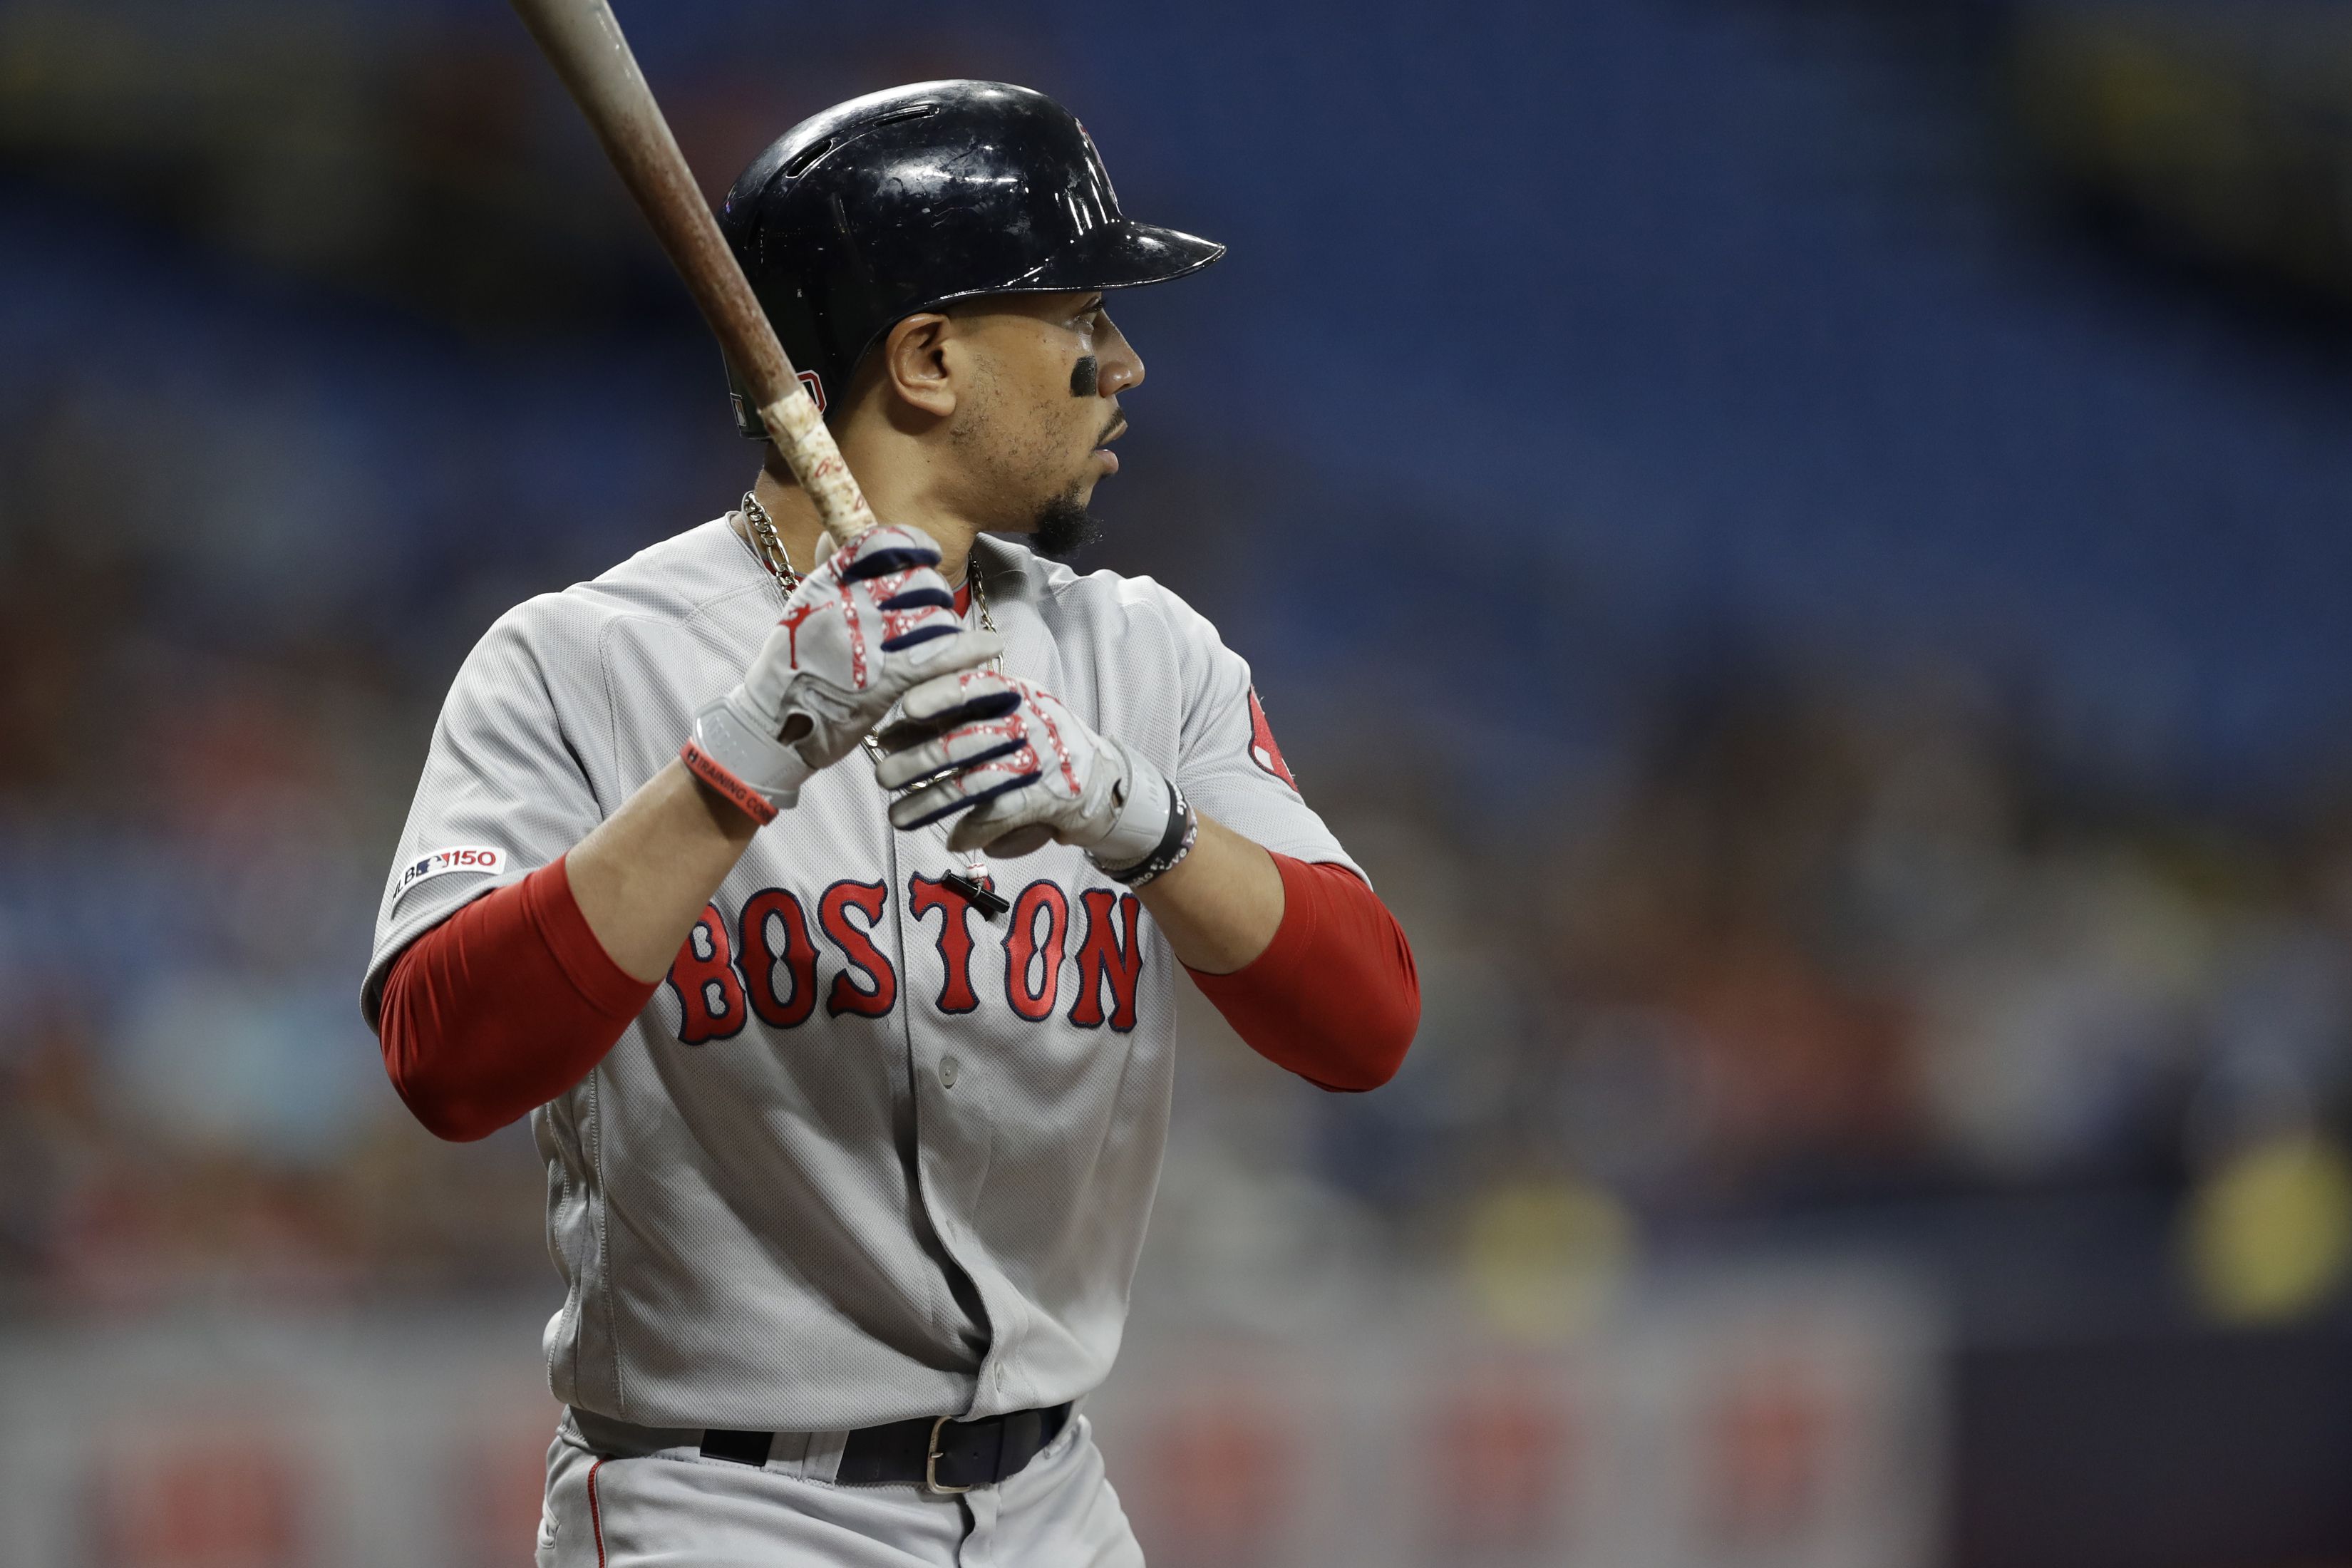 Red Sox outfielder Mookie Betts has no interest in Home Run Derby